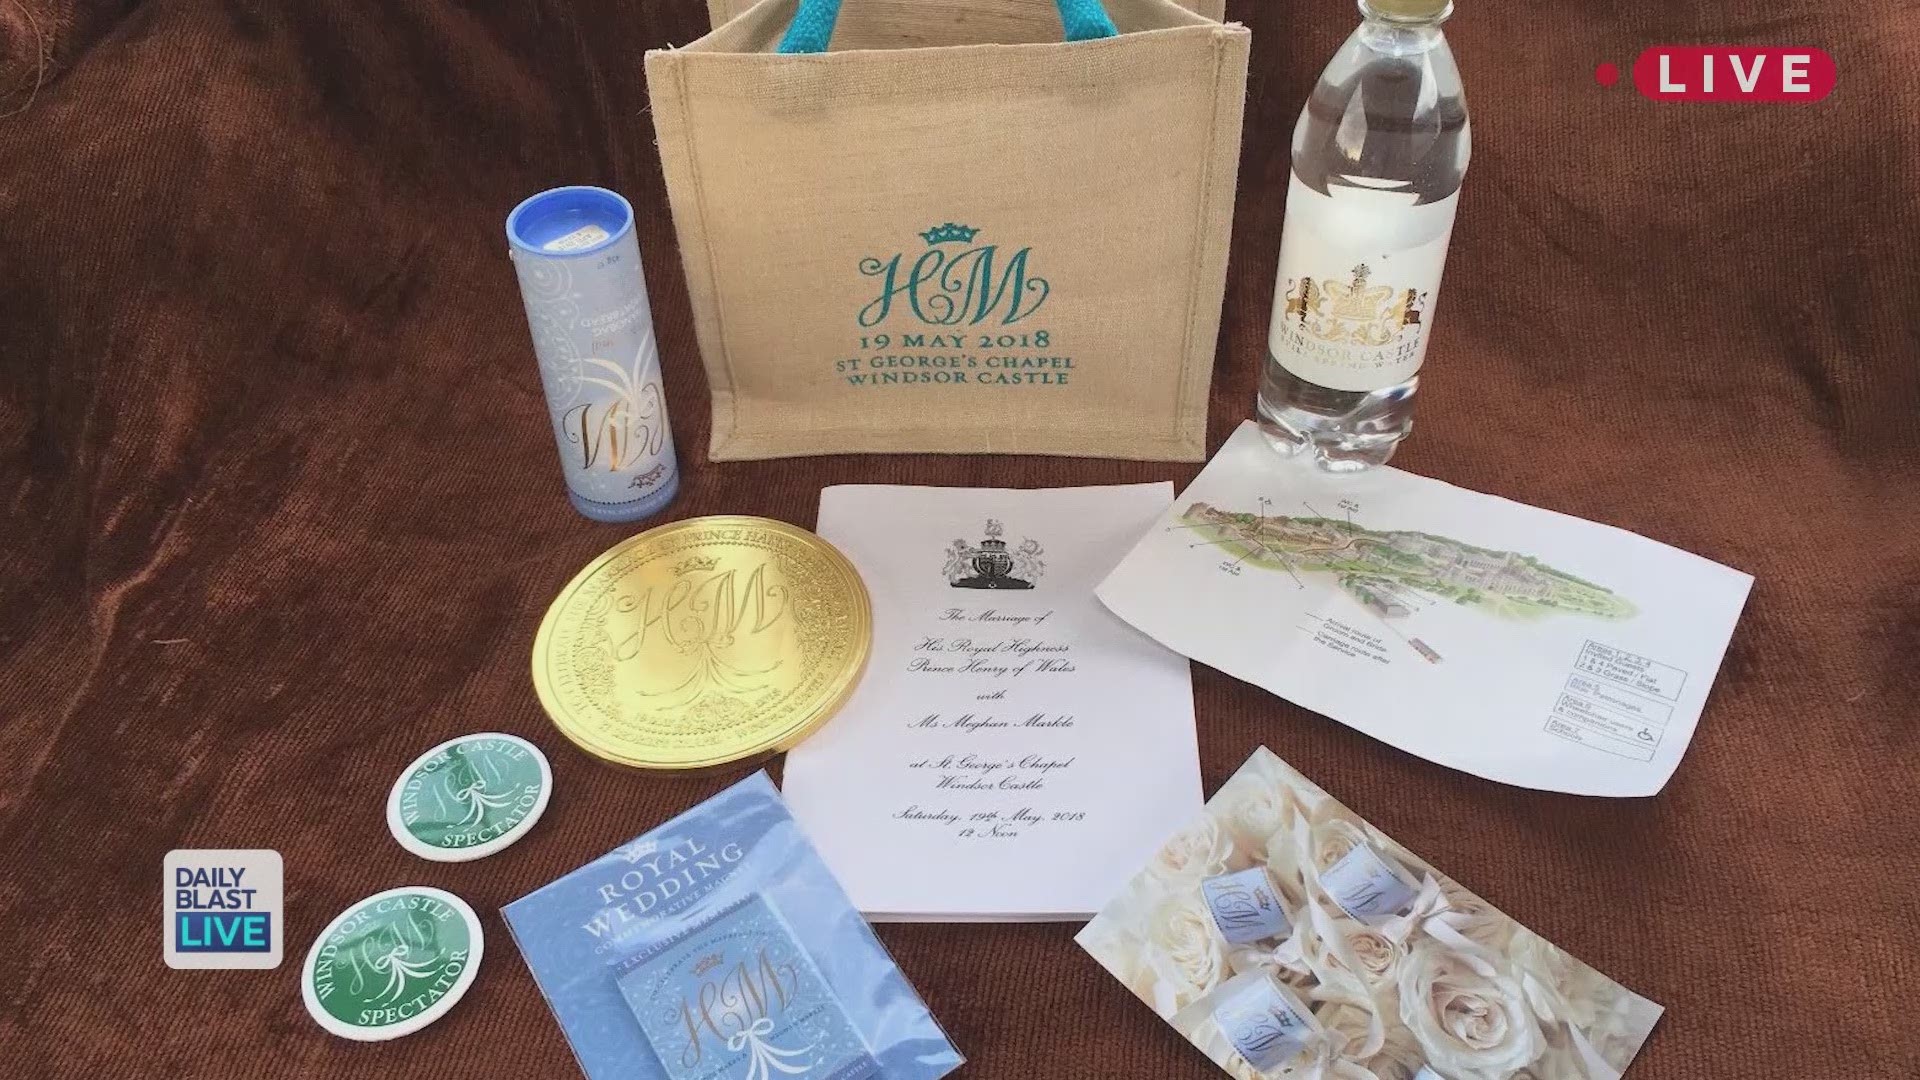 You may not have been invited to the royal wedding, but you can own a piece of the day! The official commemorative bags are available for bidding on Ebay and include magnets, chocolate, shortbread cookies, and much more. Daily Blast LIVE is bringing you a